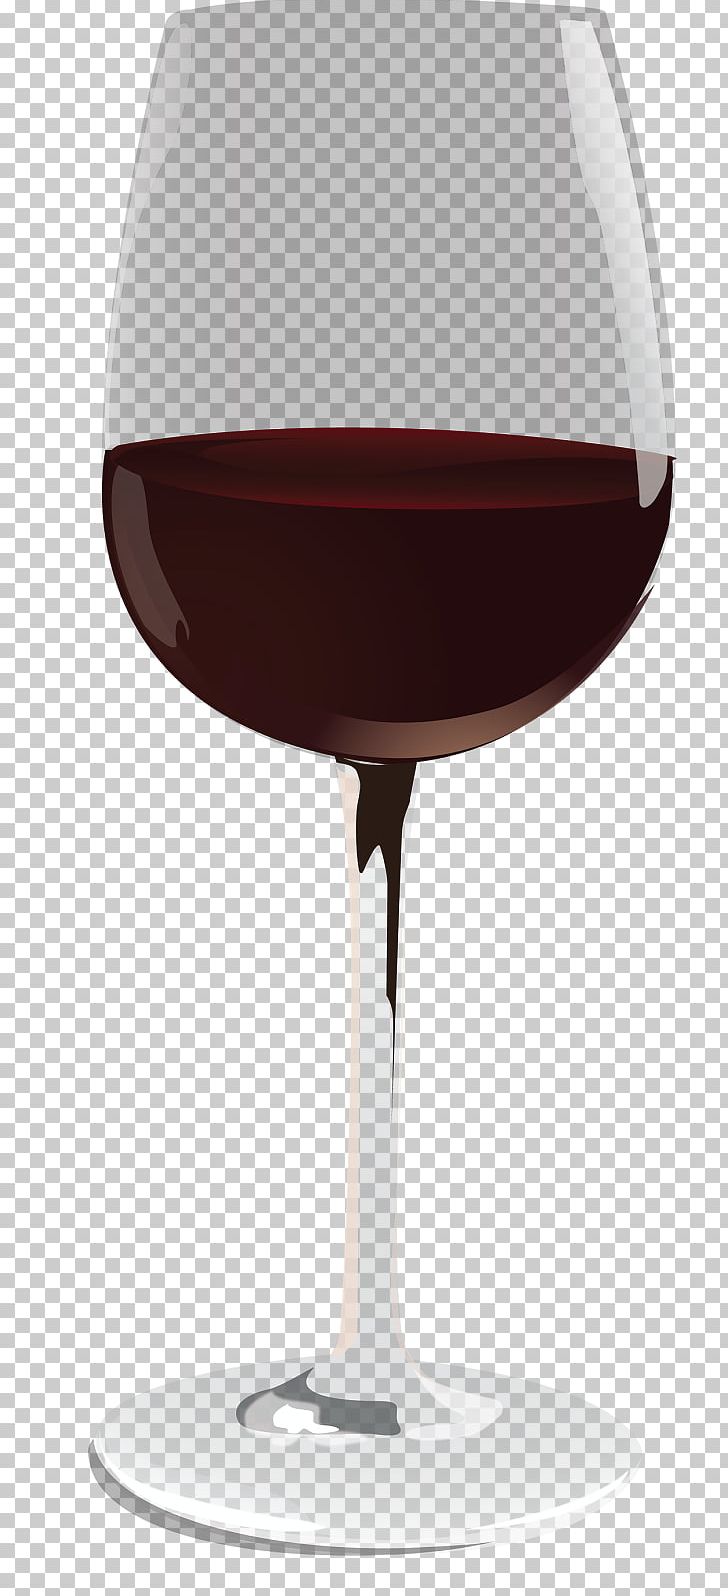 Wine Glass Rummer Red Wine Champagne Glass PNG, Clipart, Caramel Color, Champagne Glass, Champagne Stemware, Cocktail, Dots Per Inch Free PNG Download